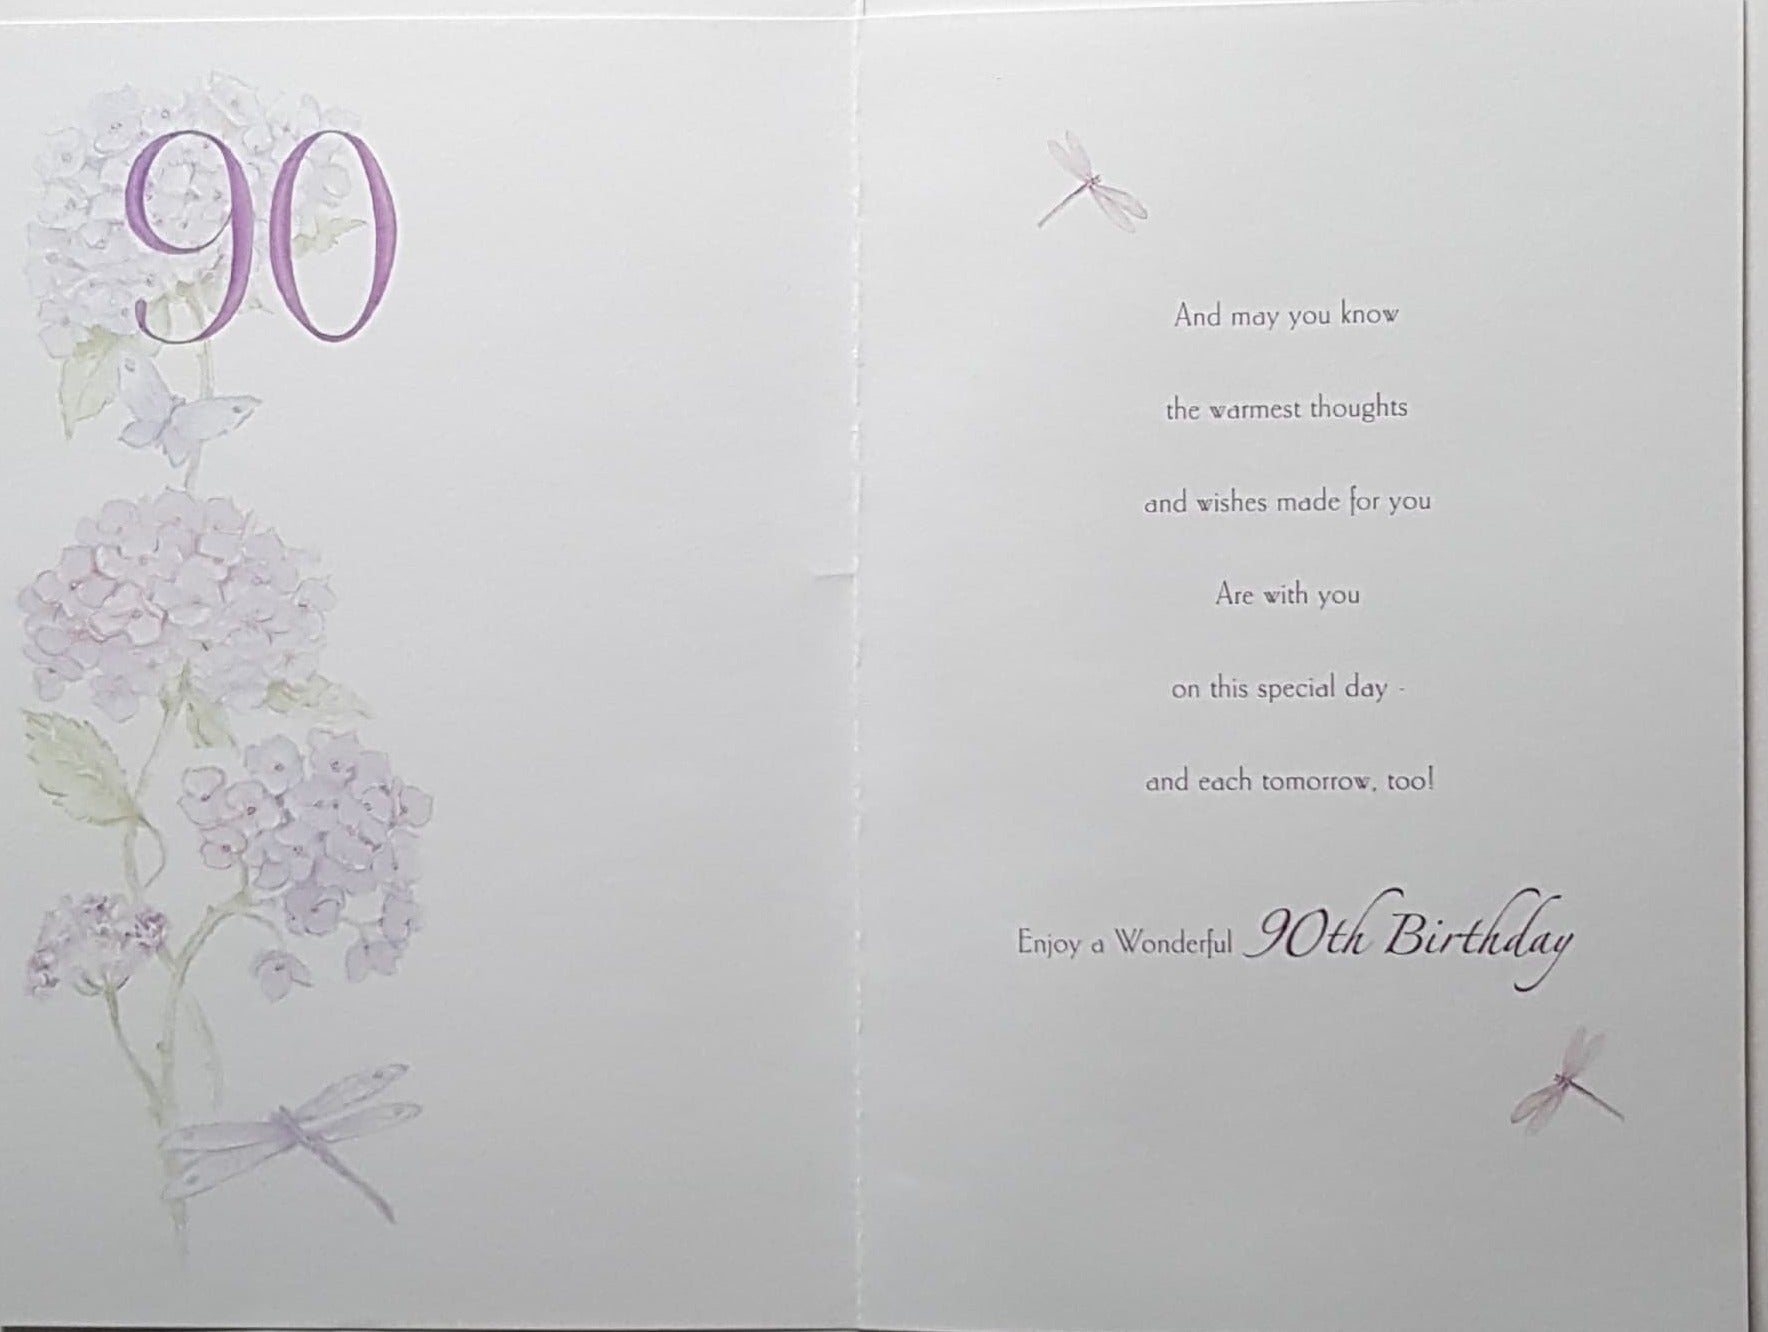 Age 90 Birthday Card - May You Look Back With Pleasure...& Purple Flowers